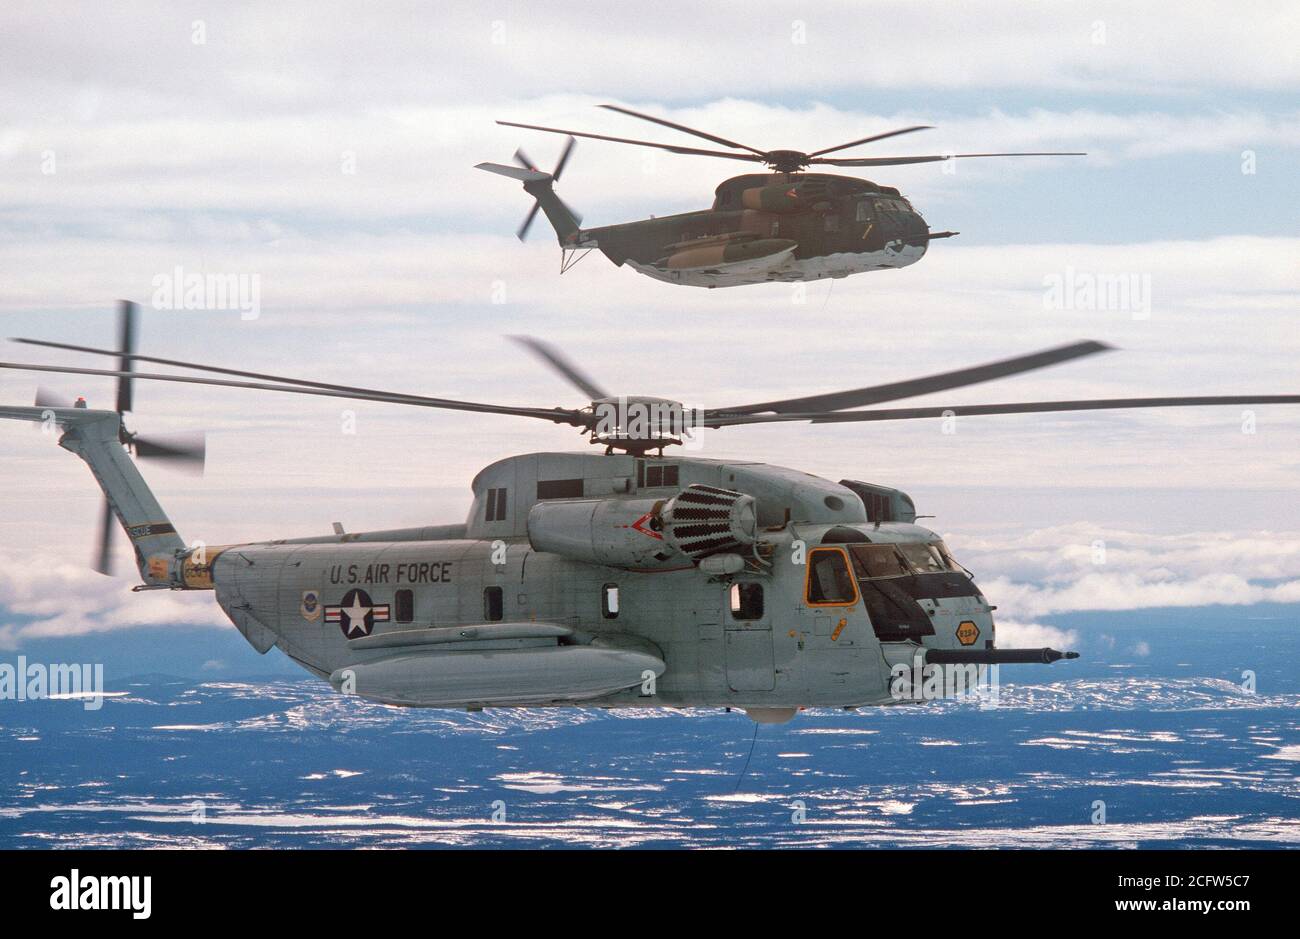 1978 - An air-to-air right side view of two 39th Aerospace Rescue and Recovery Wing HH-53 helicopters over Goose Bay while en route from Eglin Air Force Base, Florida, to Woodbridge, England. Stock Photo